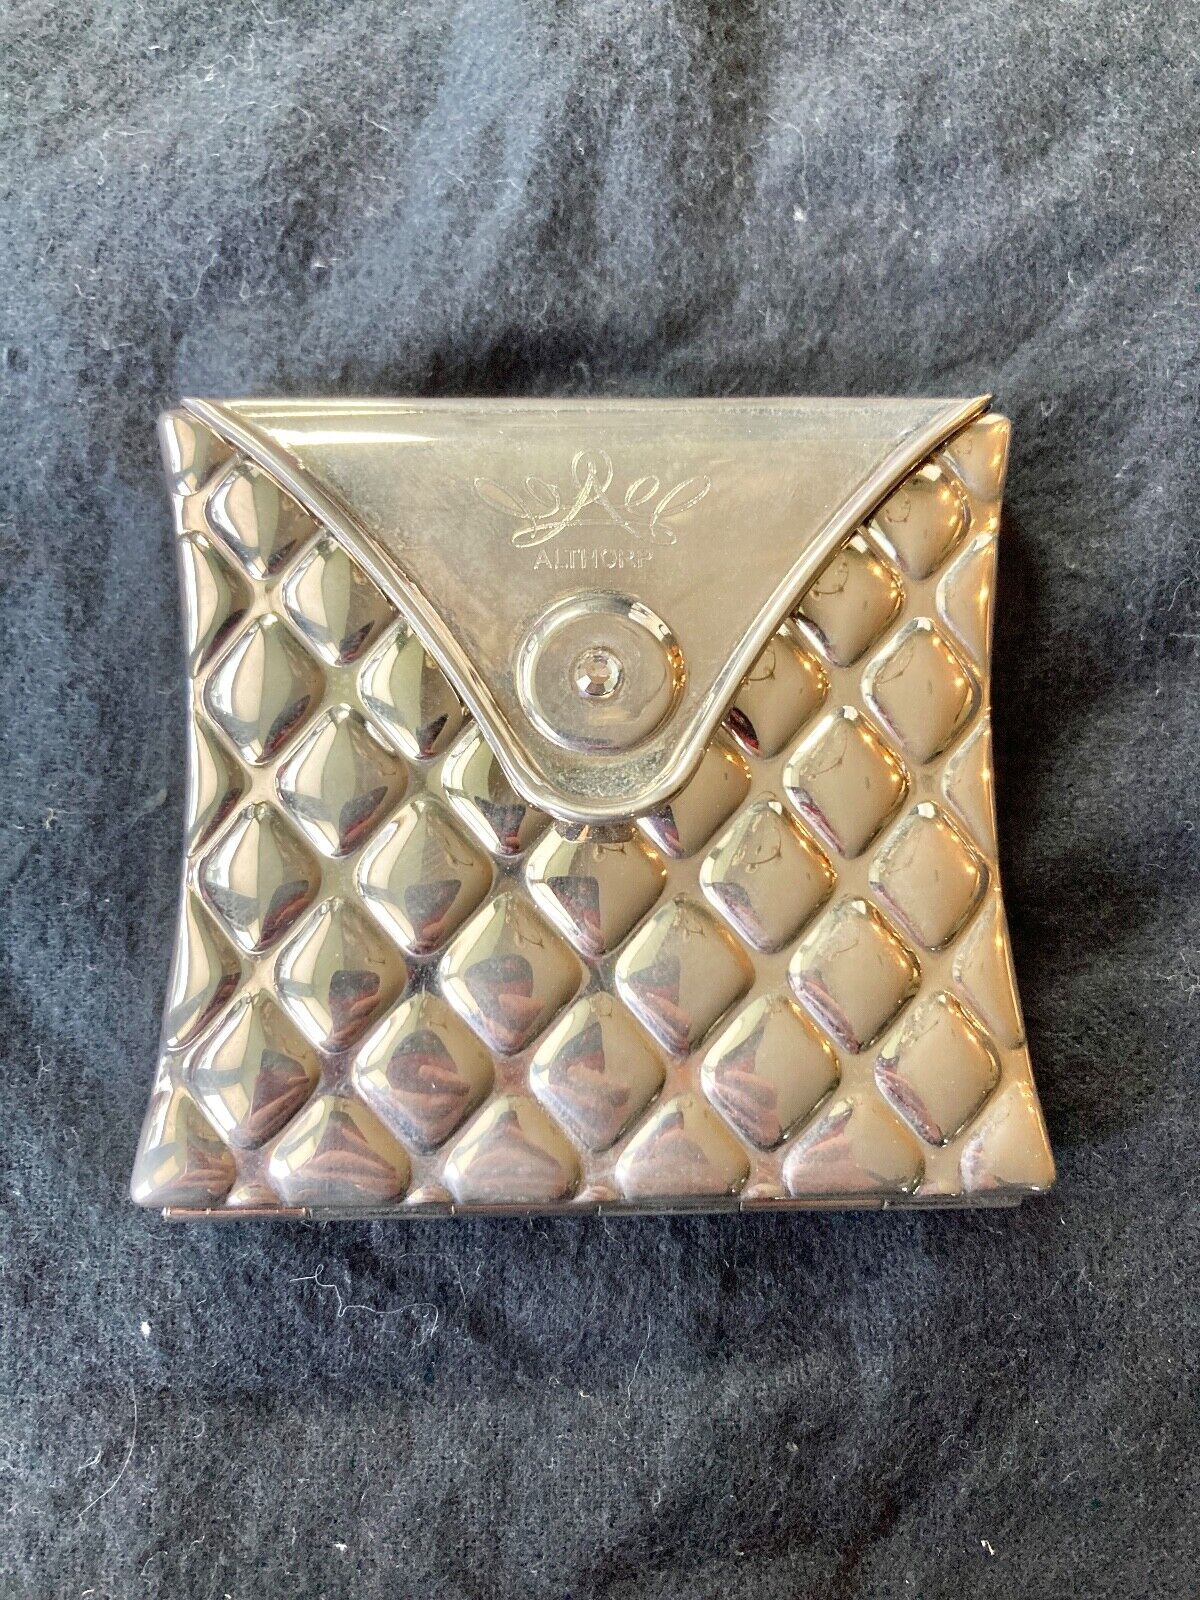 Beautiful Althorp Princess Diana Compact Mirror w/ Silver-plate Quilted Case.